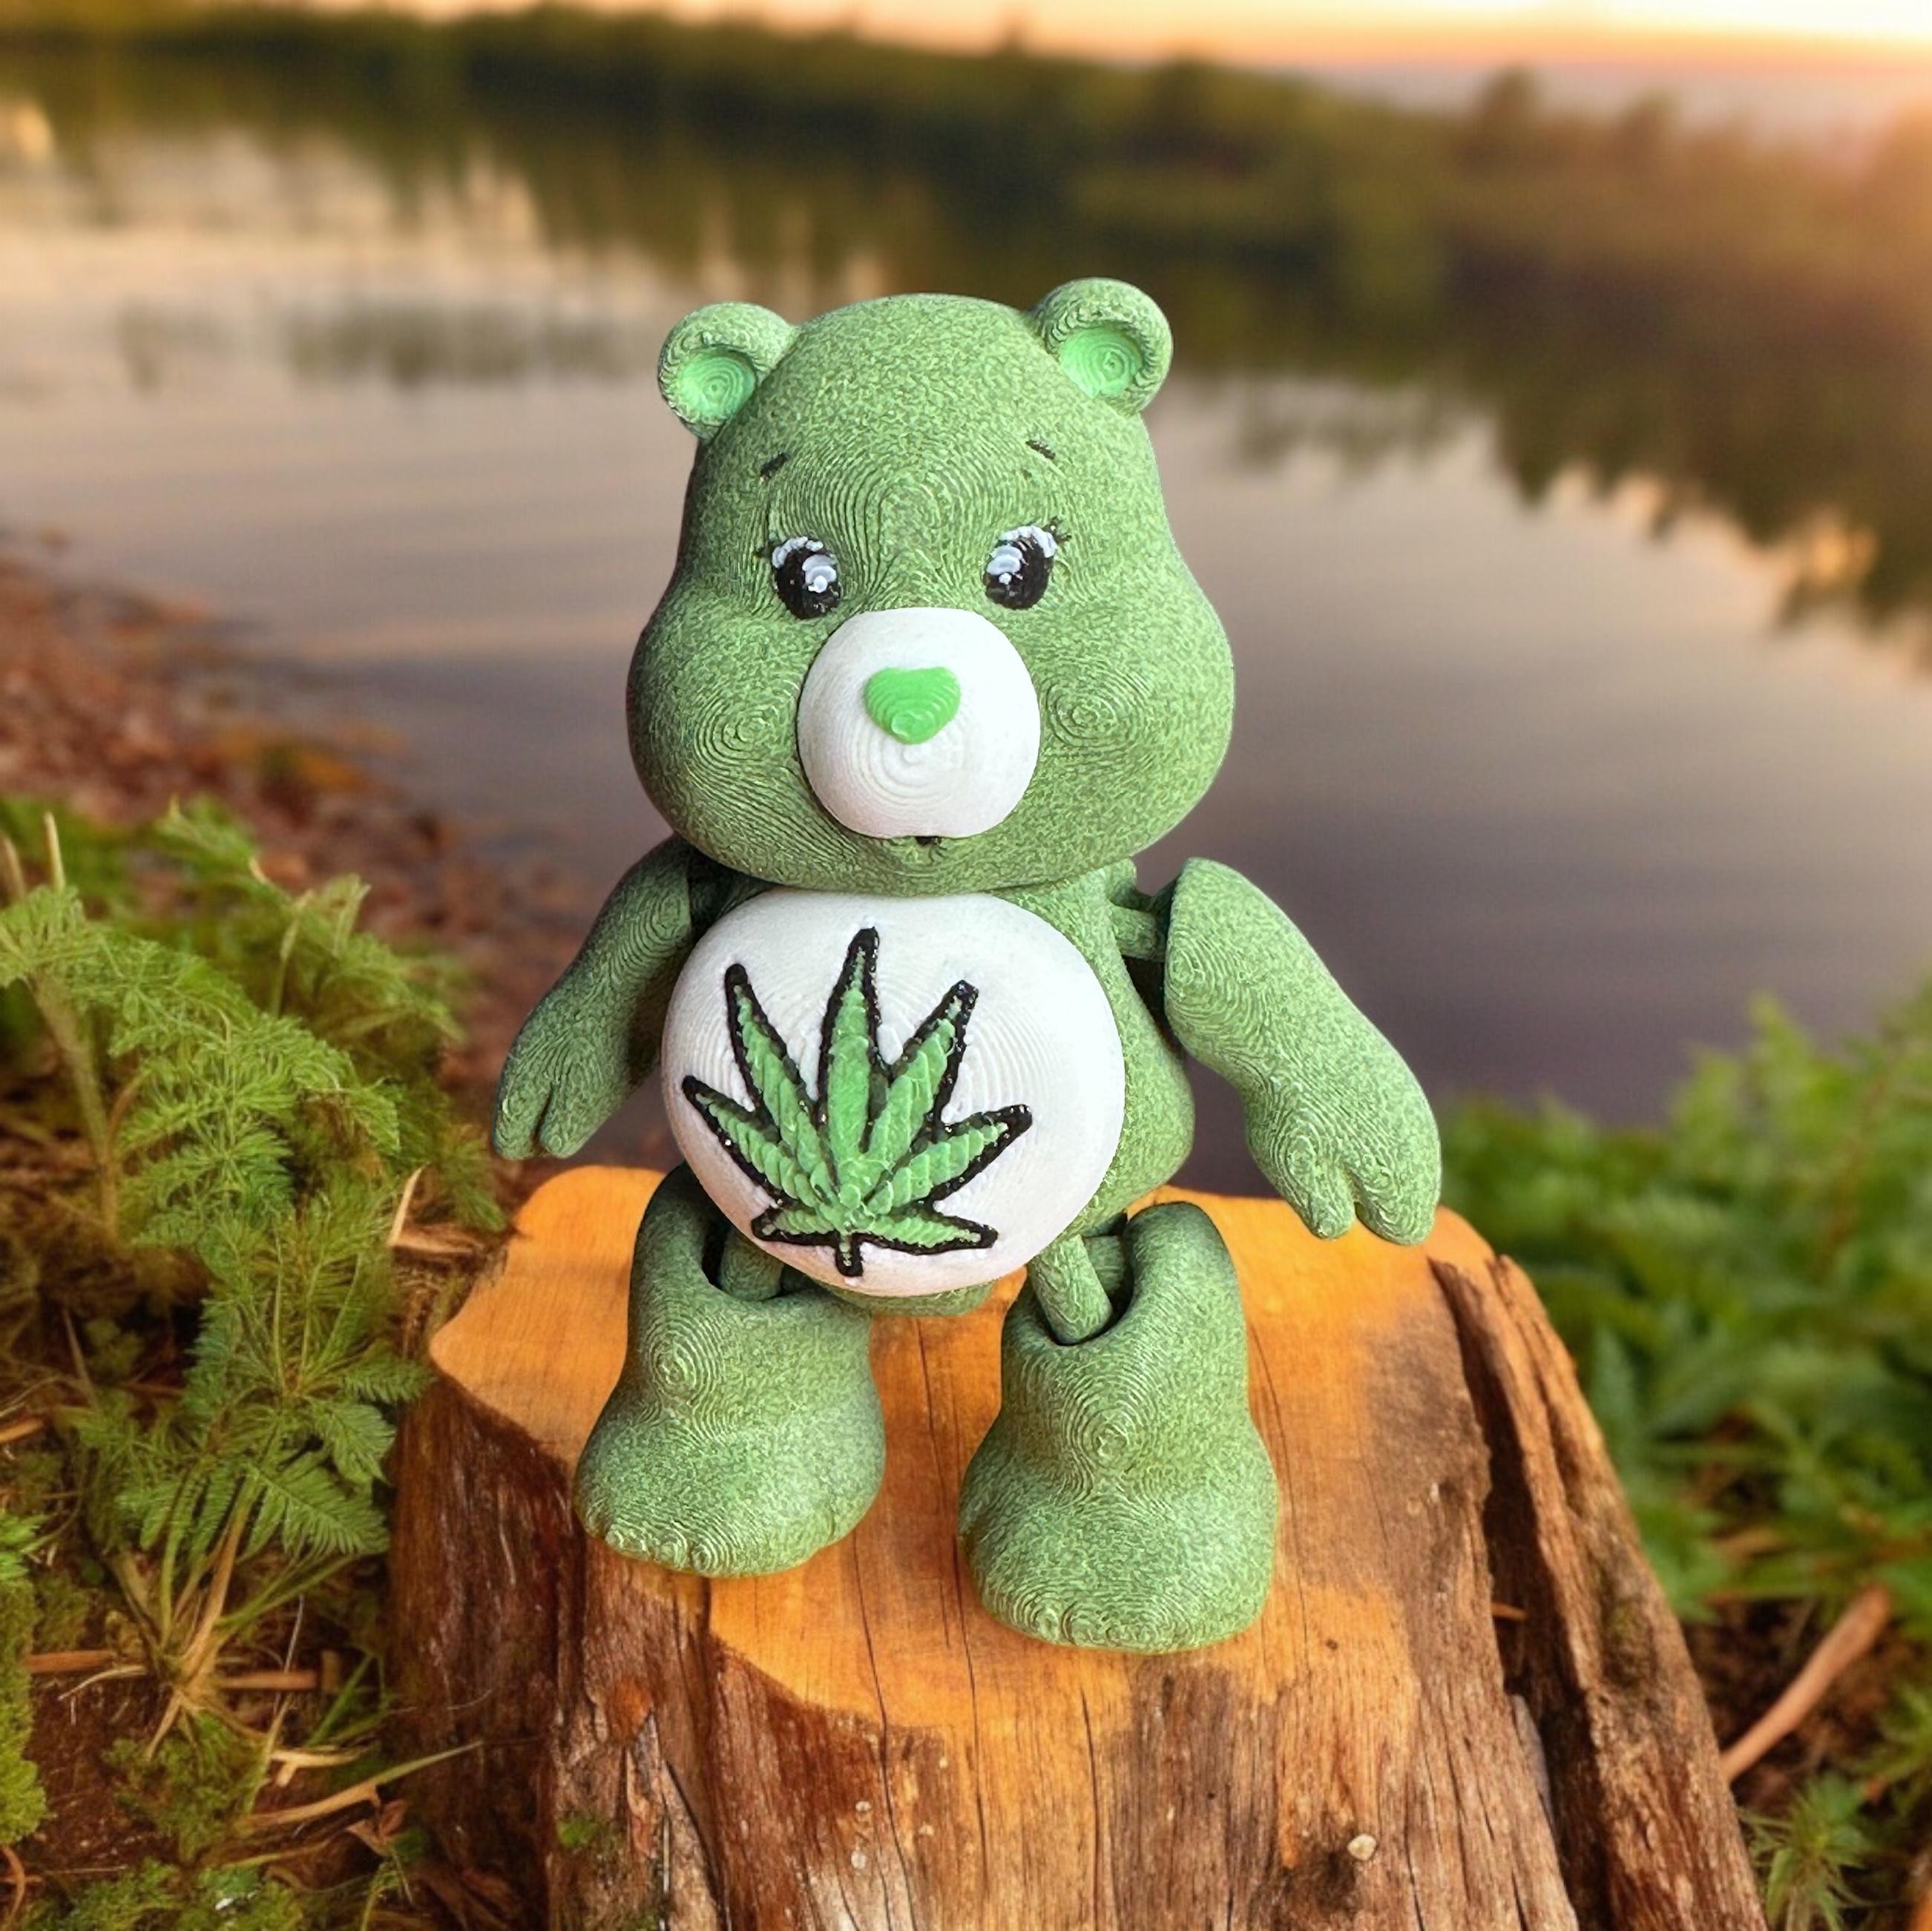 Stoner Bear, Care Bear, Articulate, Print in Place, Flexi, Fun, Funny, Weed, Mary Jane 3d model